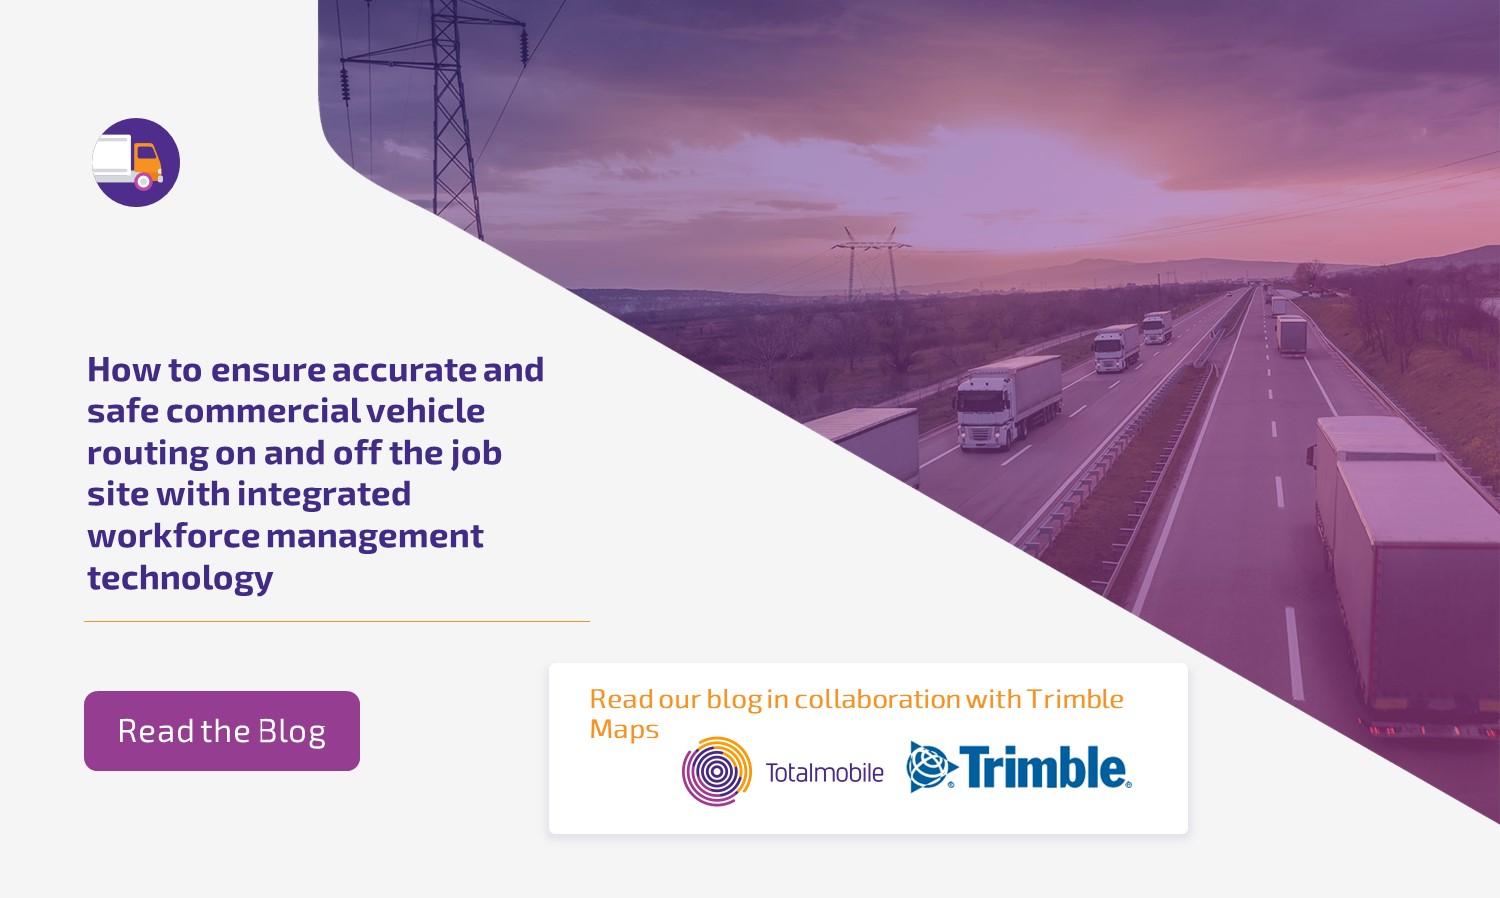 How to ensure accurate and safe commercial vehicle routing with integrated workforce management technology